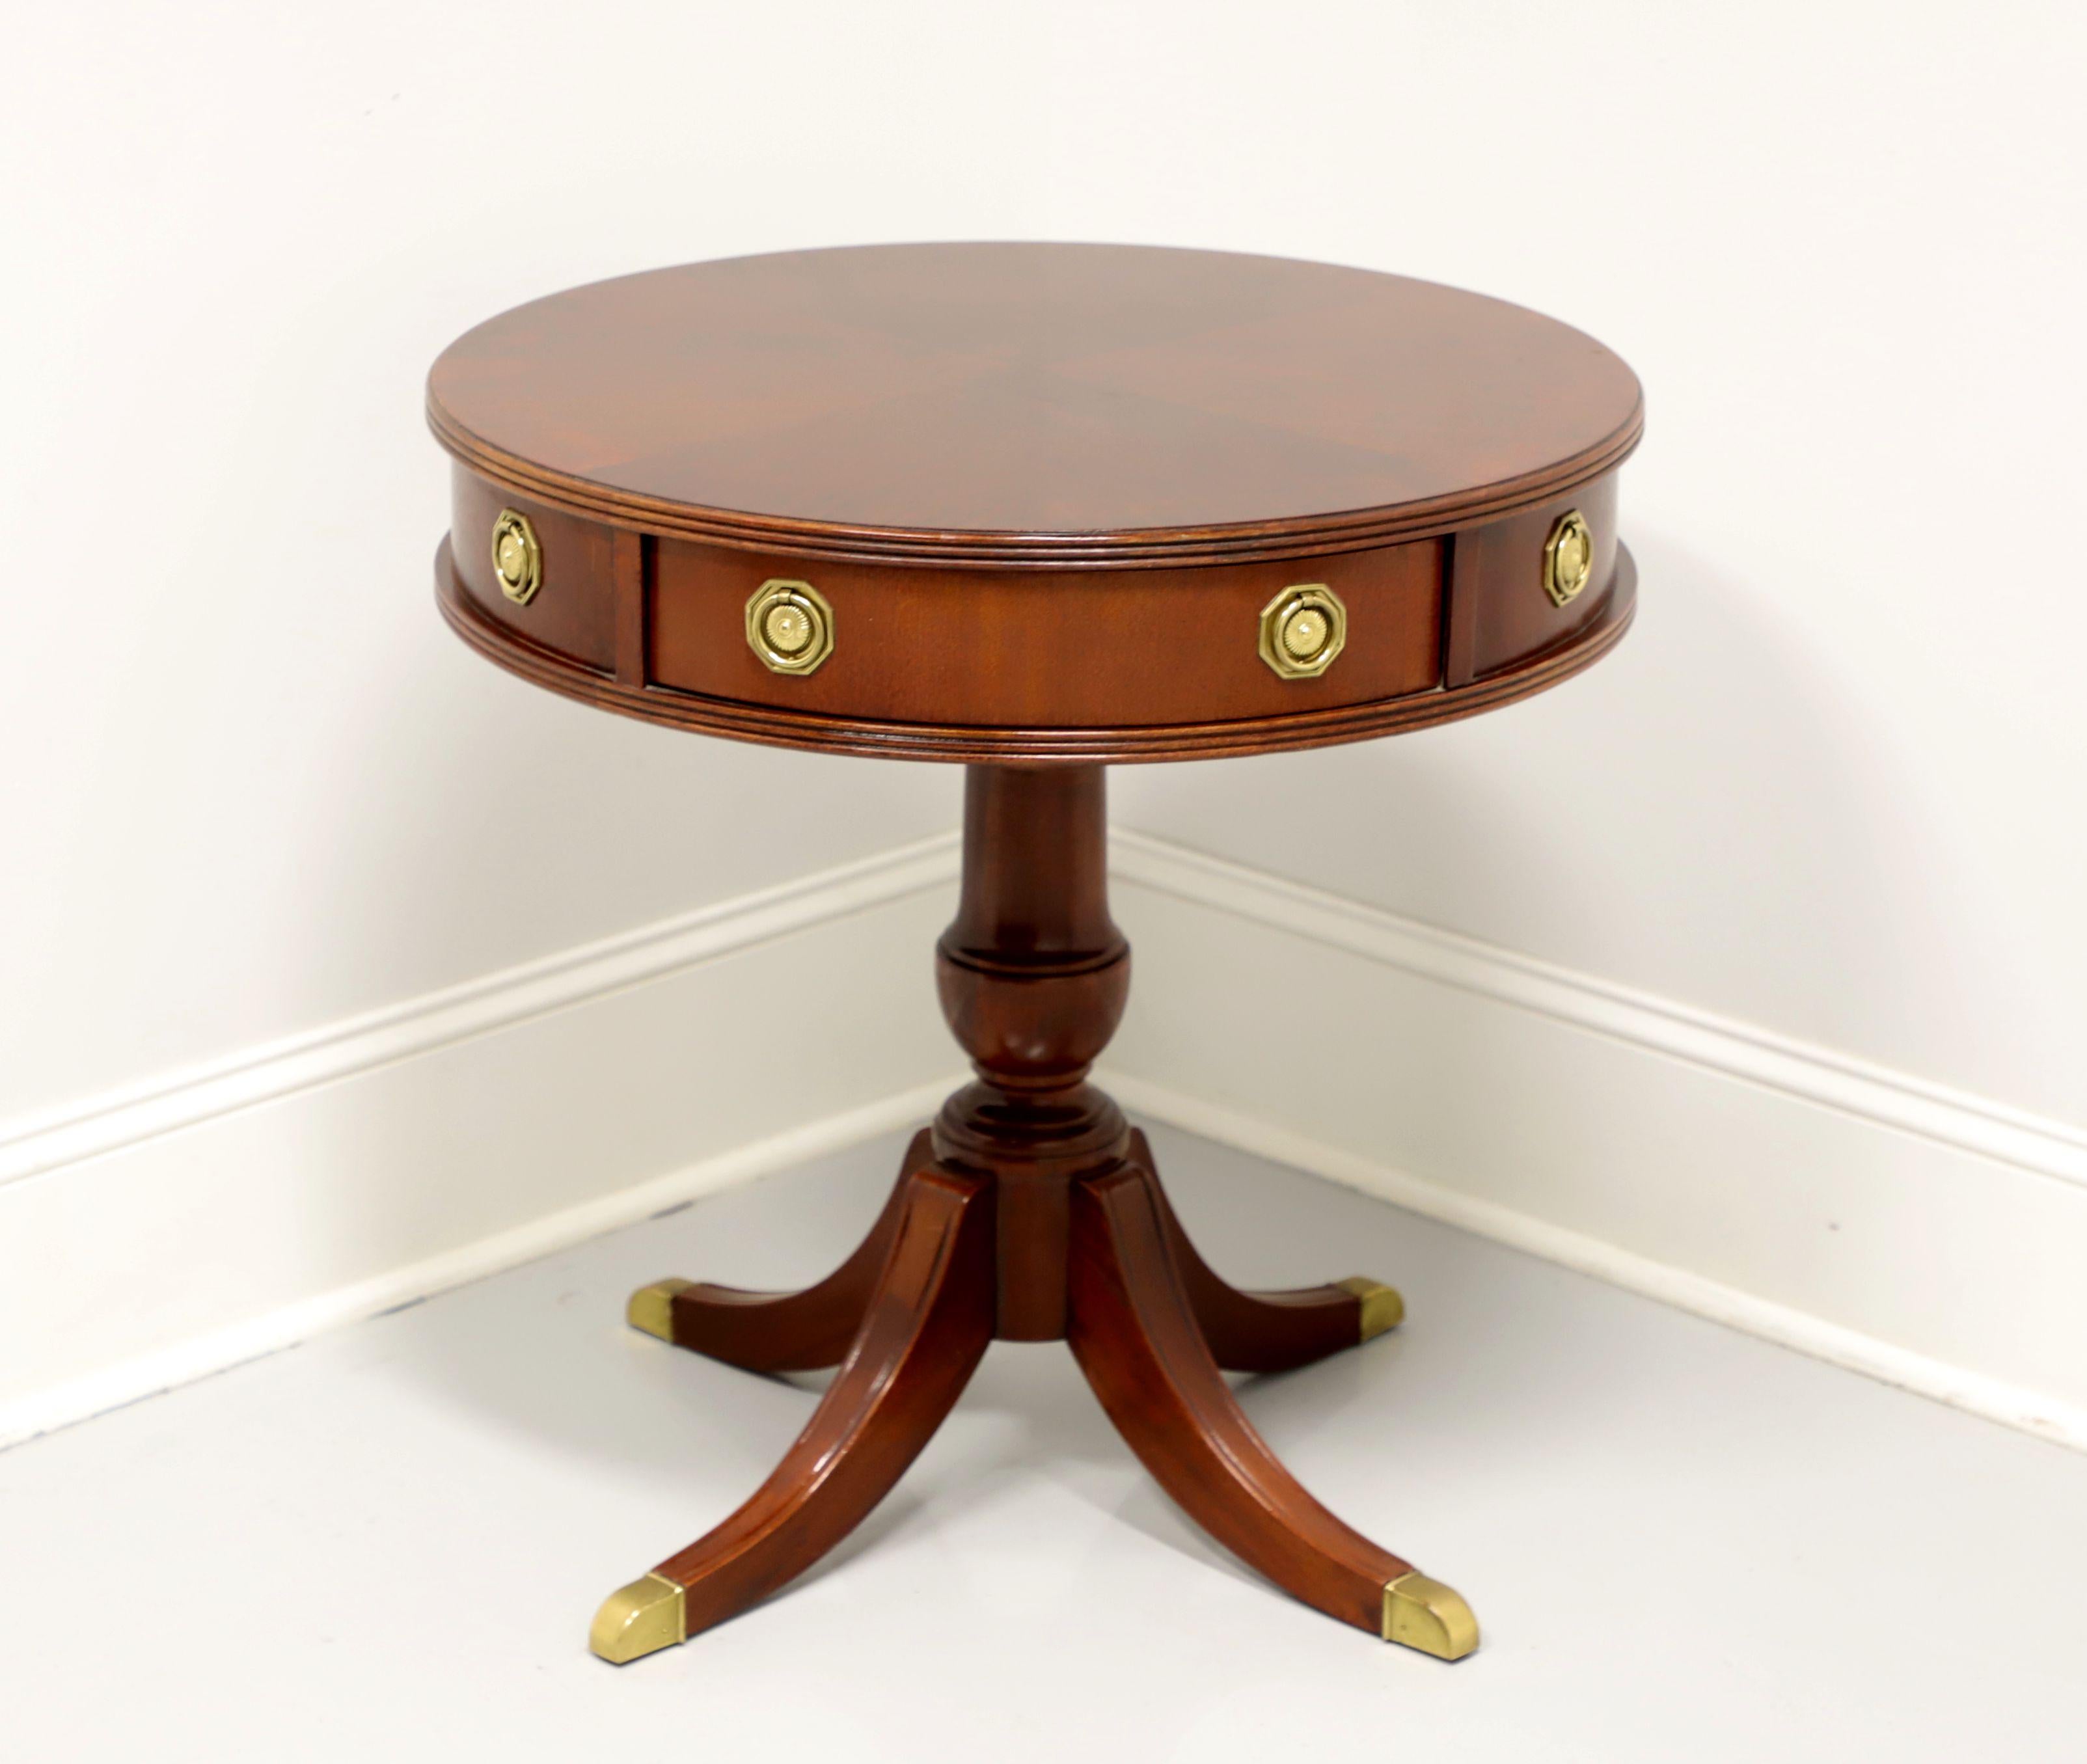 HAMMARY Banded Inlaid Mahogany Round Drum Table with Pedestal Base 4